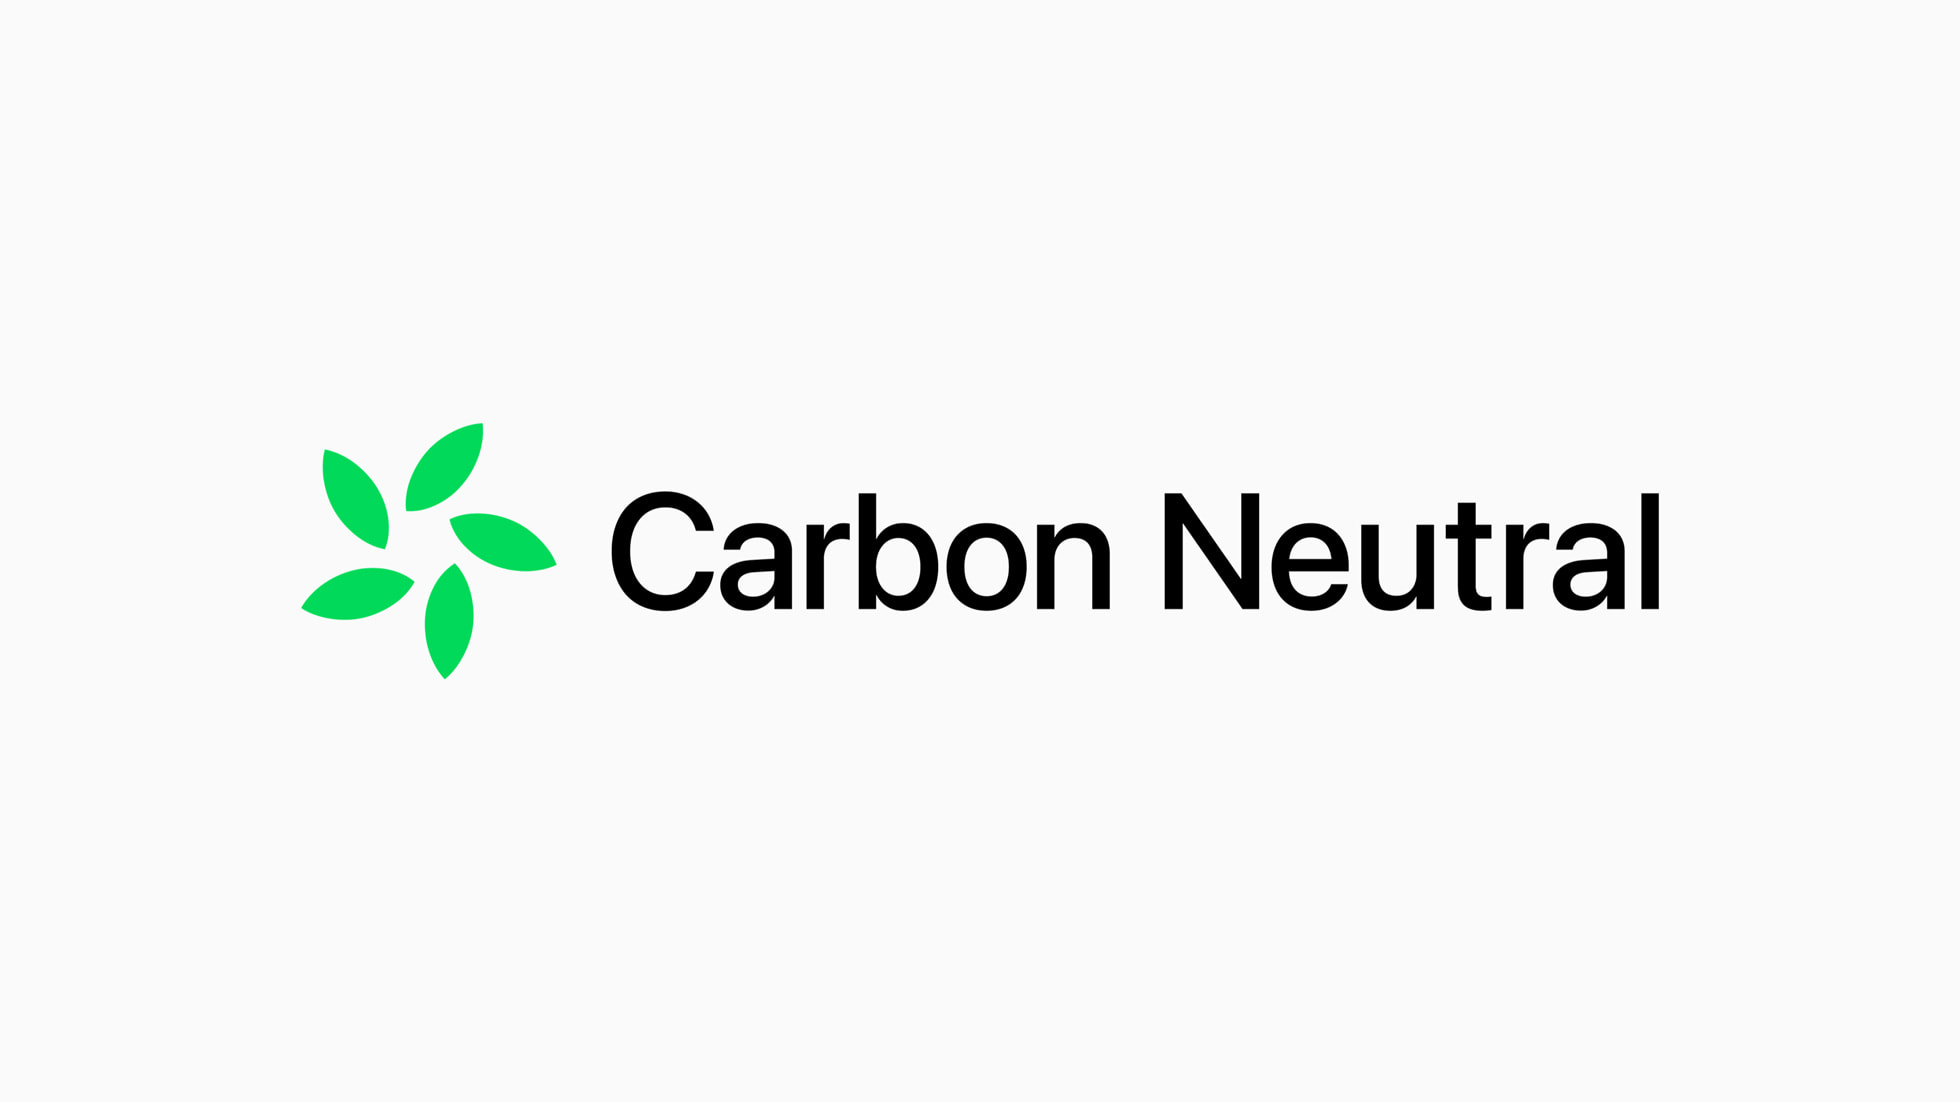 The new logo for Apple’s carbon neutral initiative.